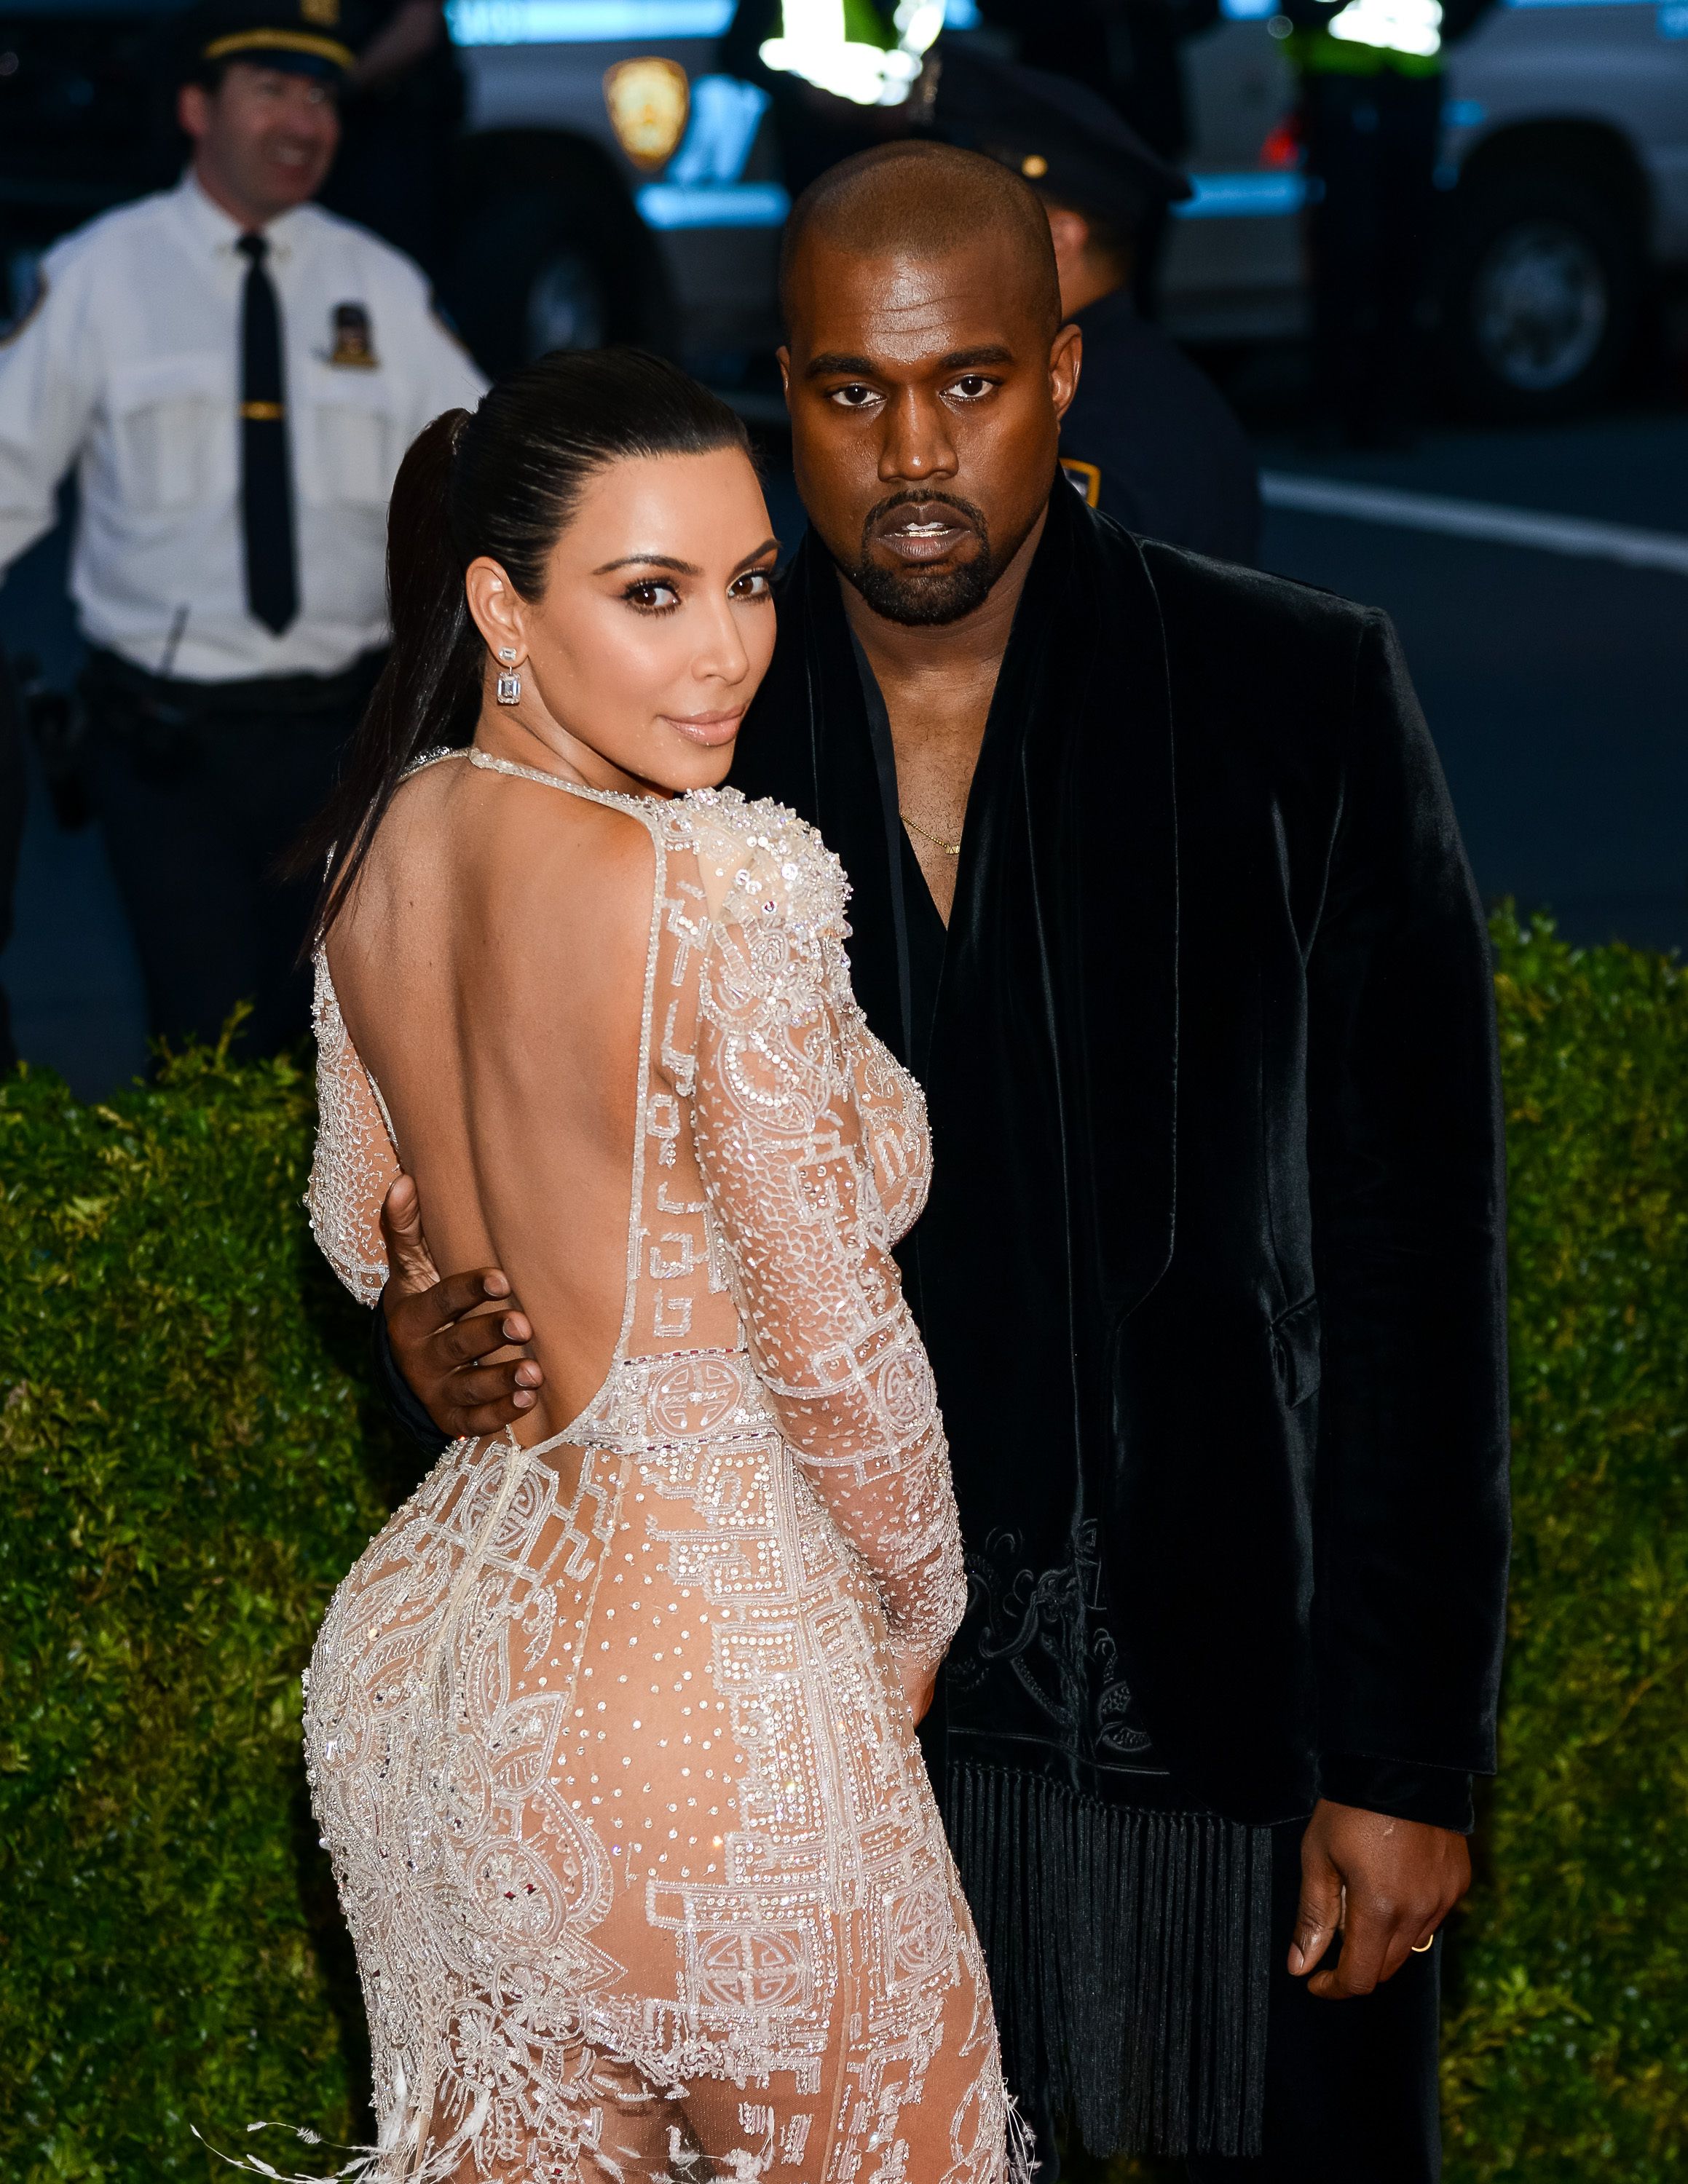 Kim and Kanye at an event